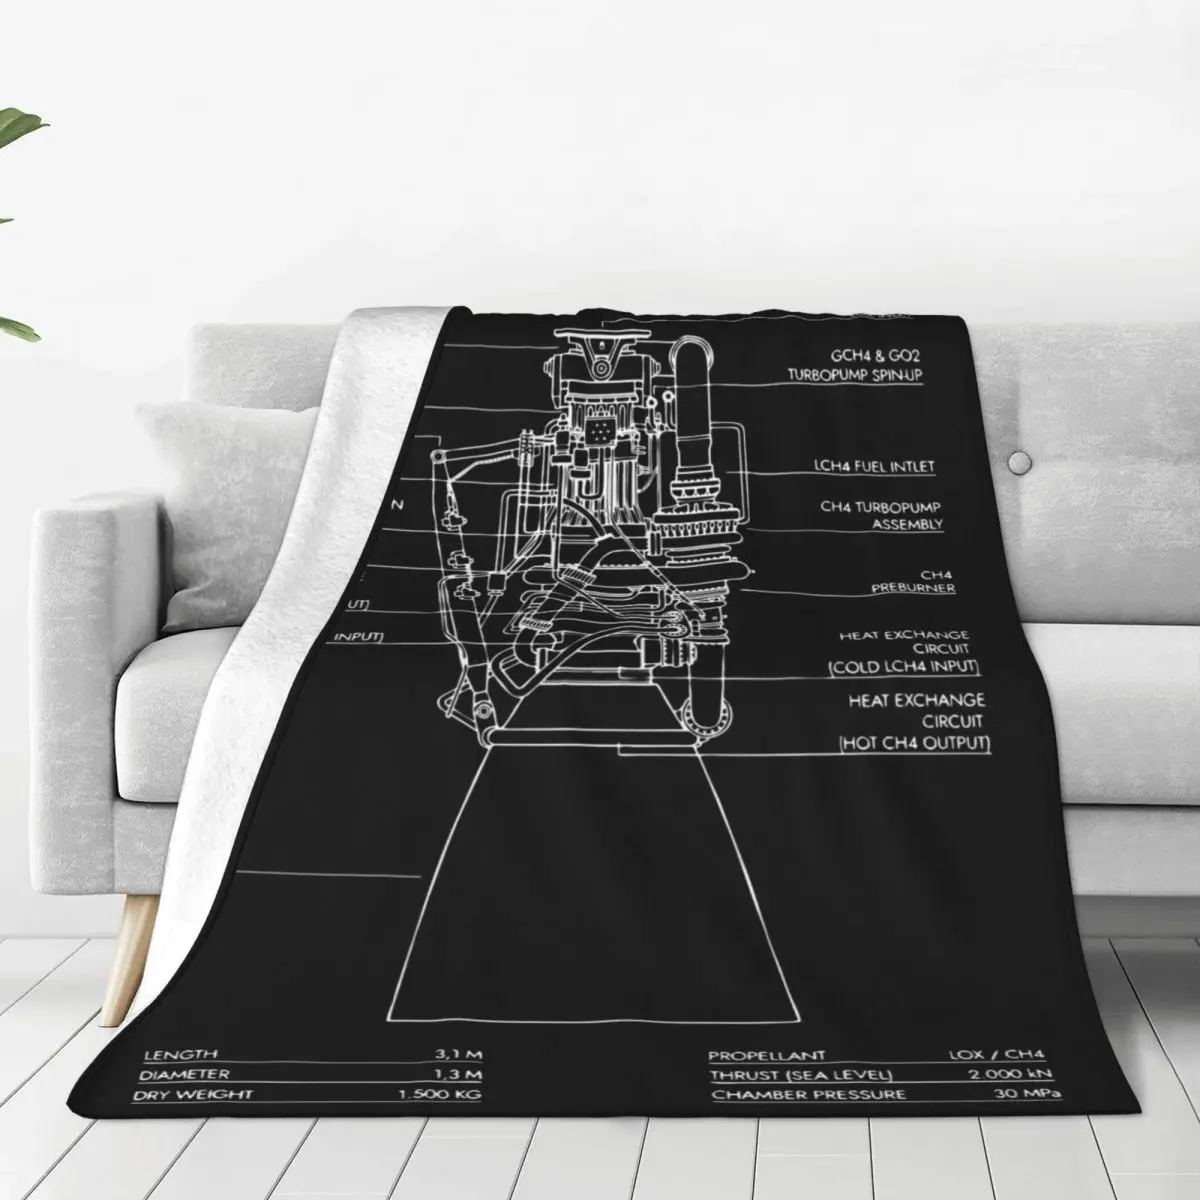 

SpaceX Raptor Engine Starship (2) Flannel Blankets Awesome Throw Blankets for Bed Sofa Couch 200x150cm Plush Thin Quilt